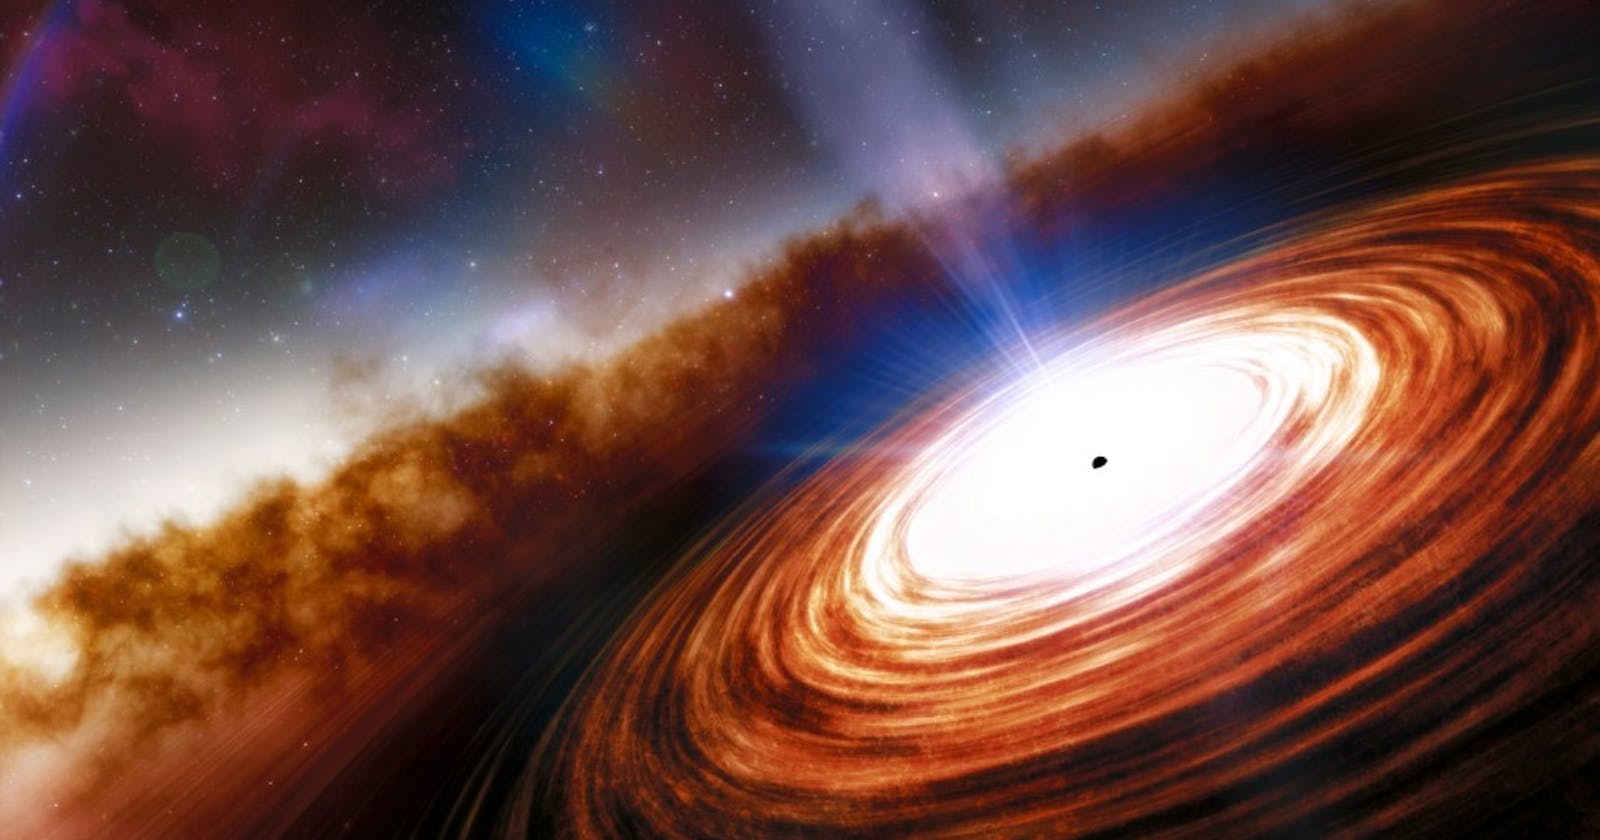 The Formation and Rapid Growth of Supermassive Black Holes in the Early Universe